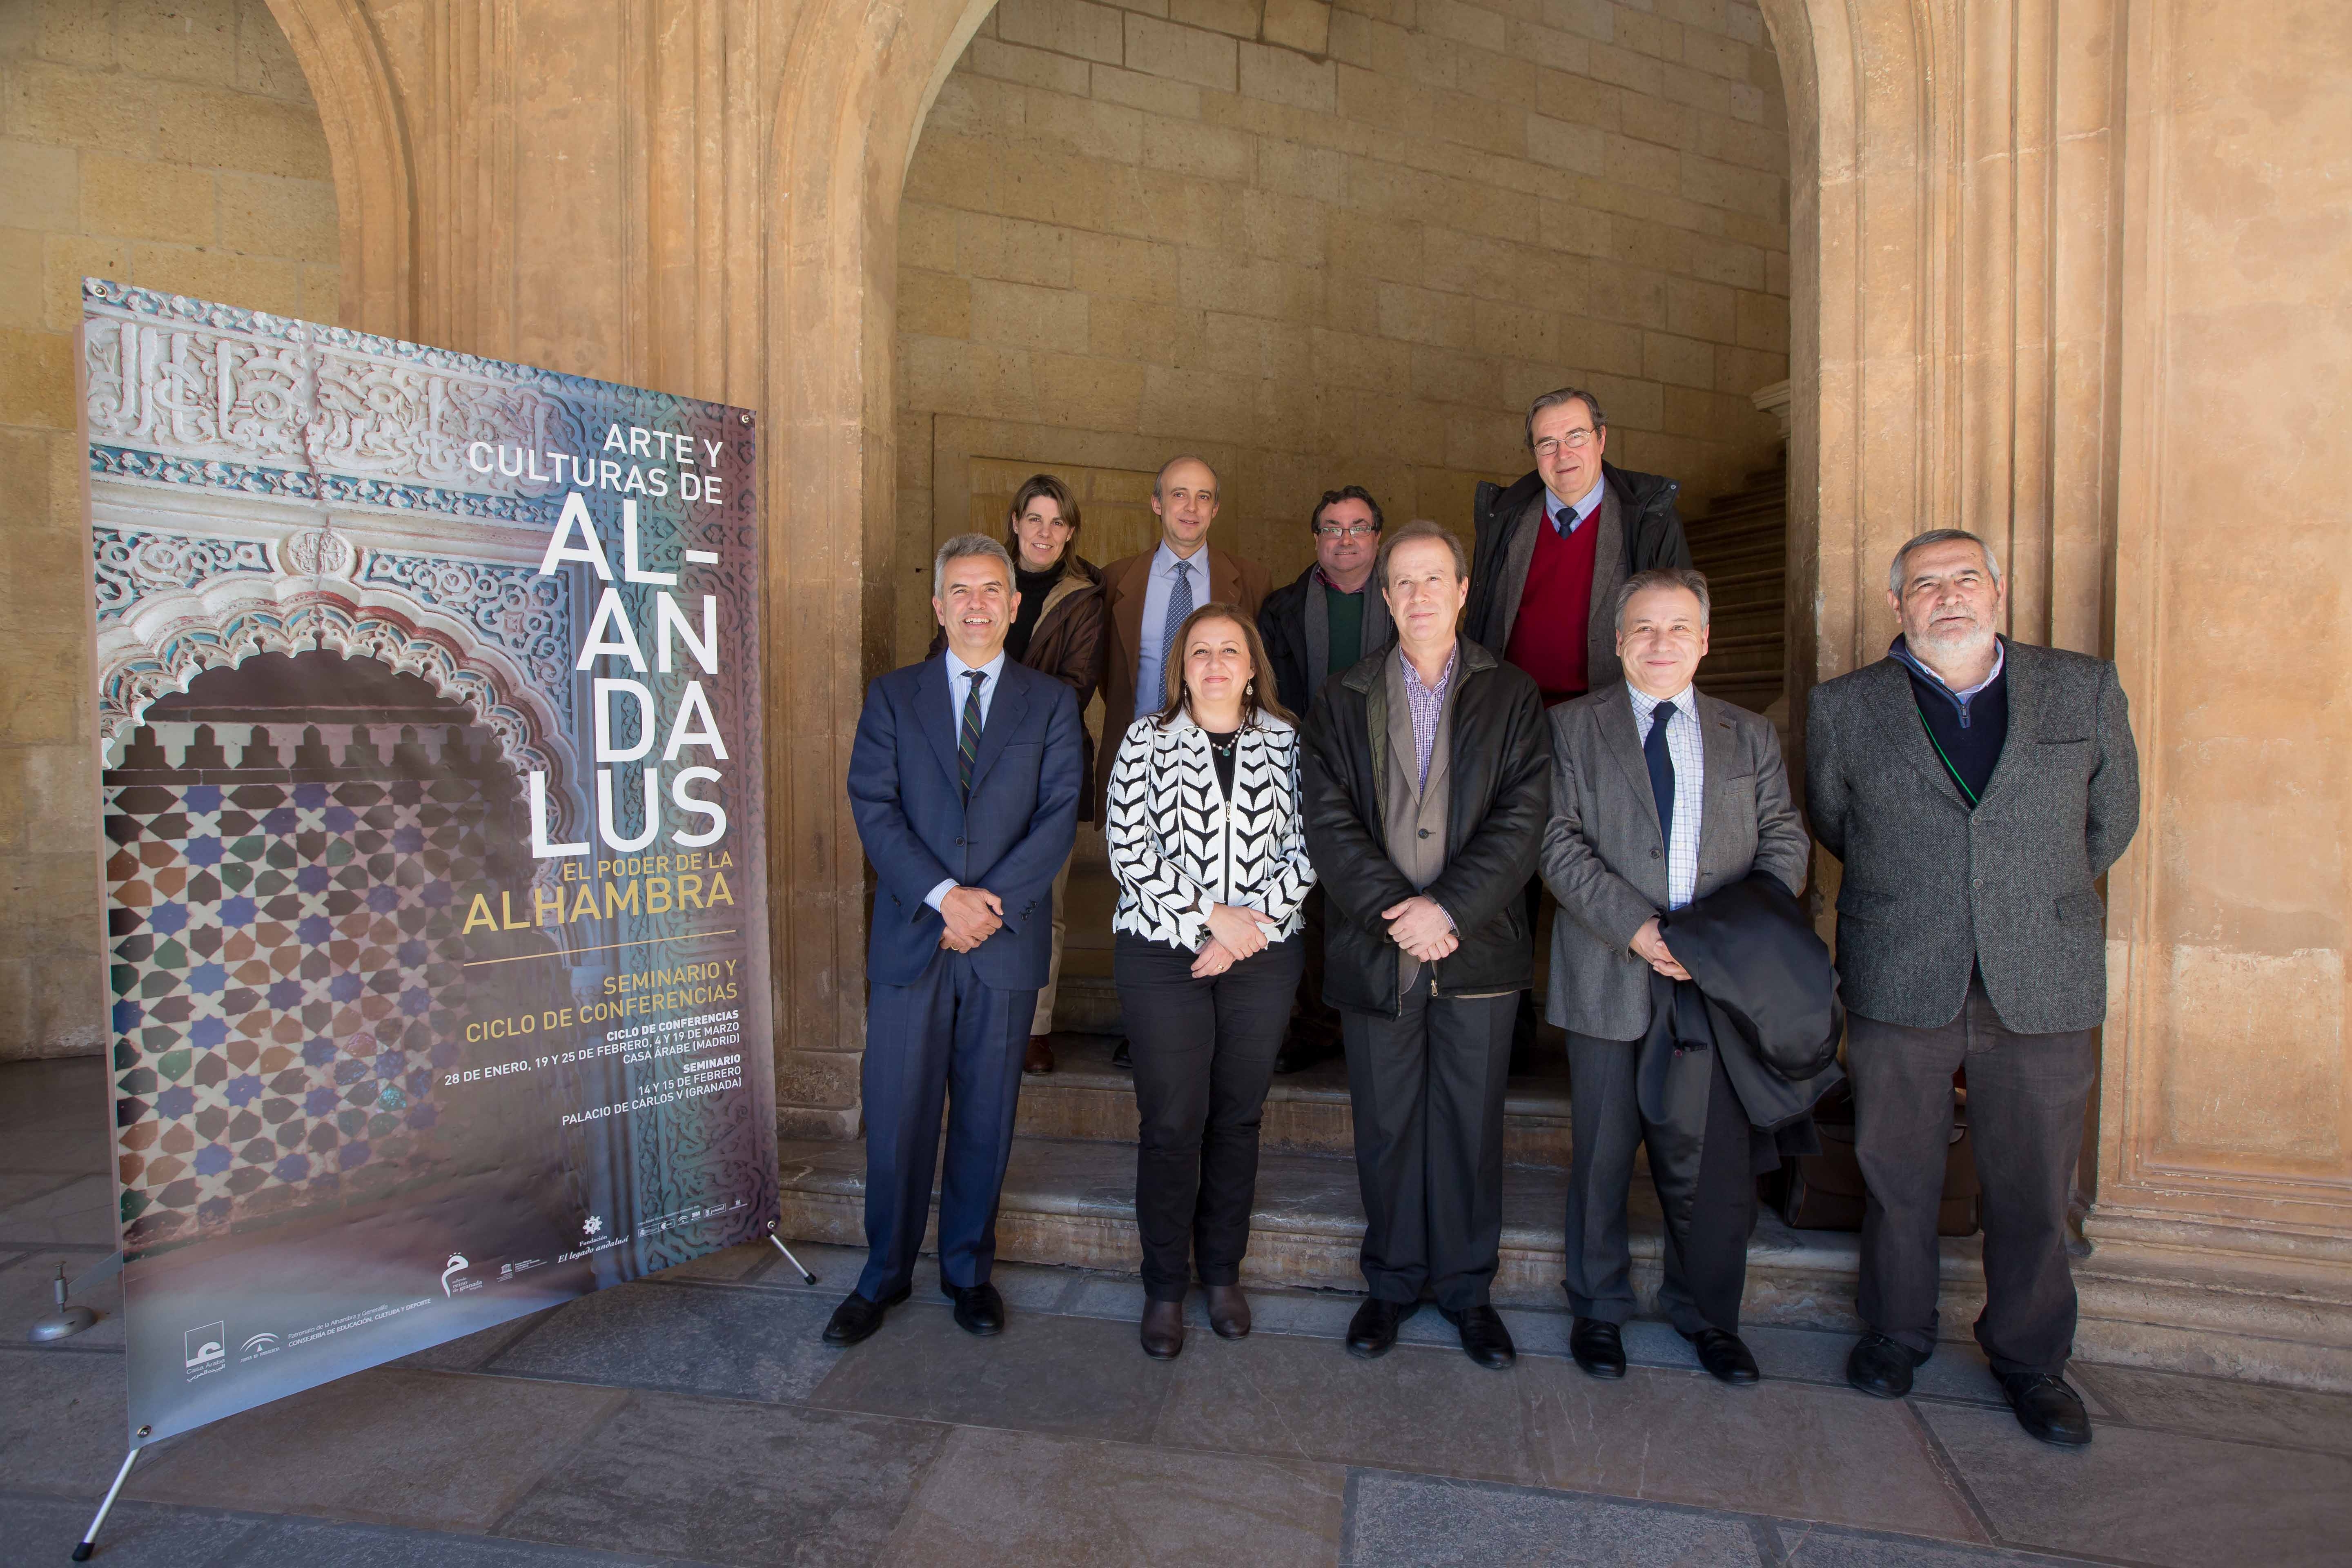 The Seminar “Art and Cultures of al-Andalus. The power of the Alhambra” begins at the Palace of Charles V